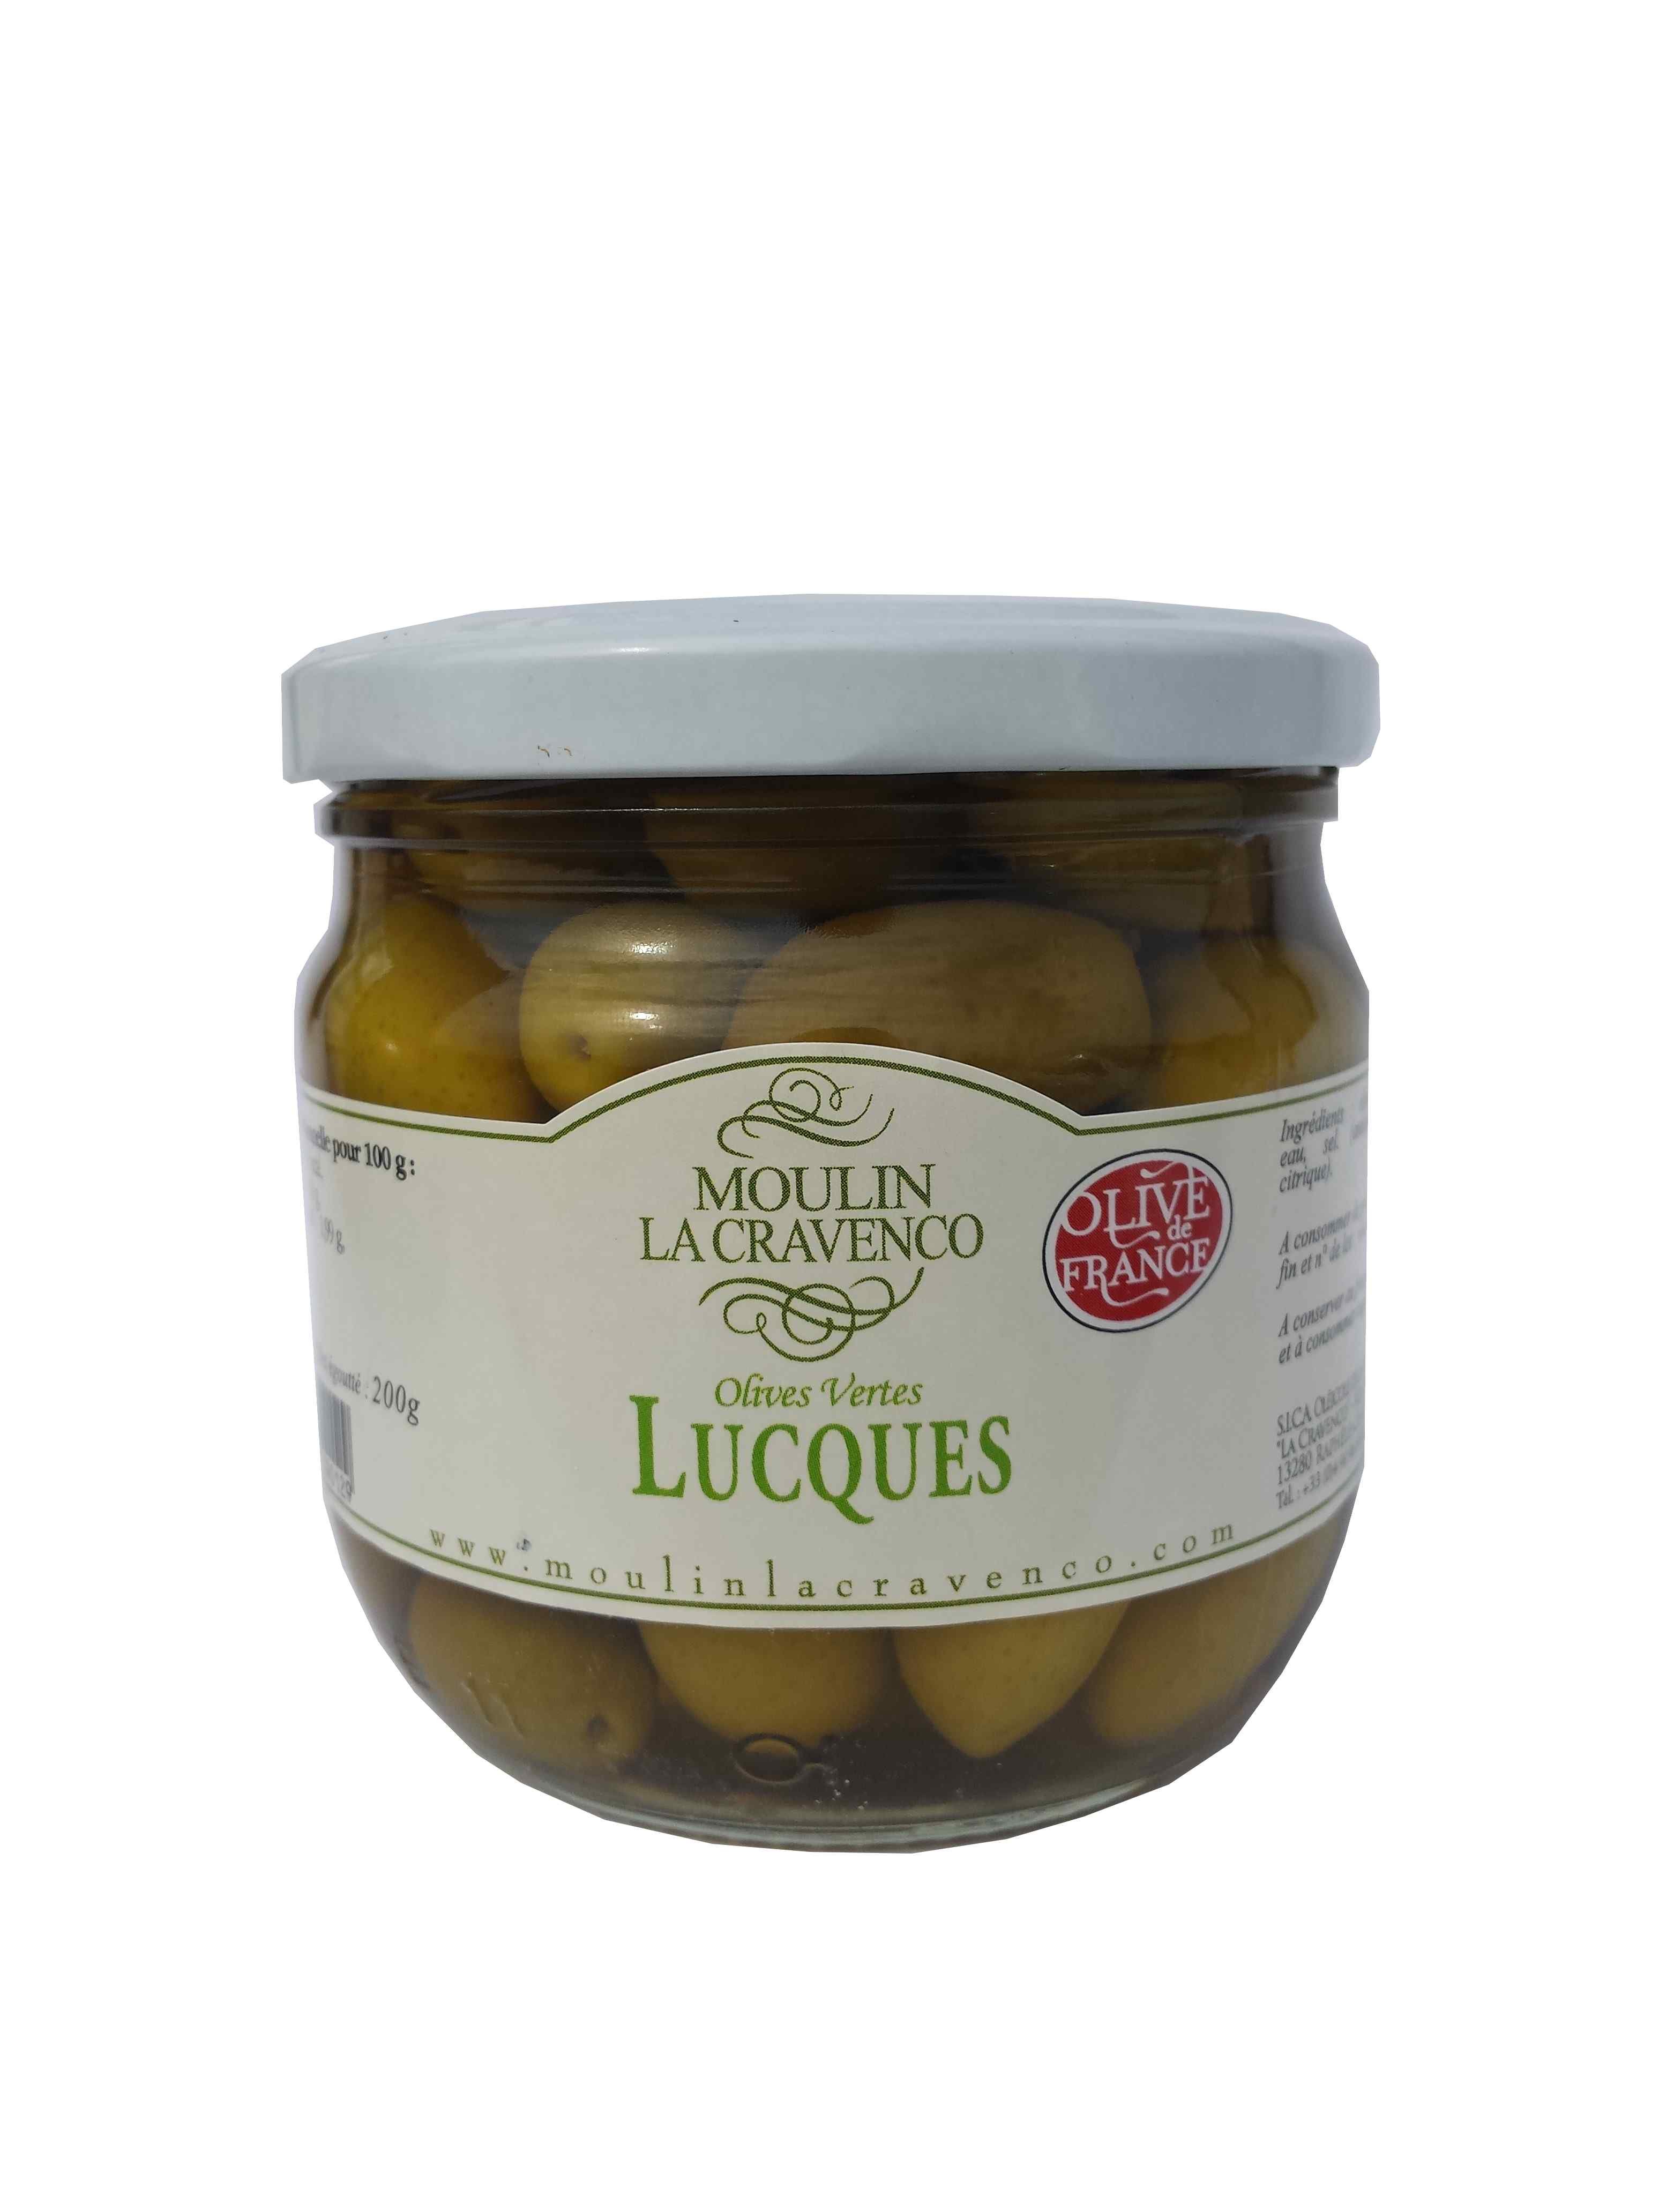 LUCQUES 200g